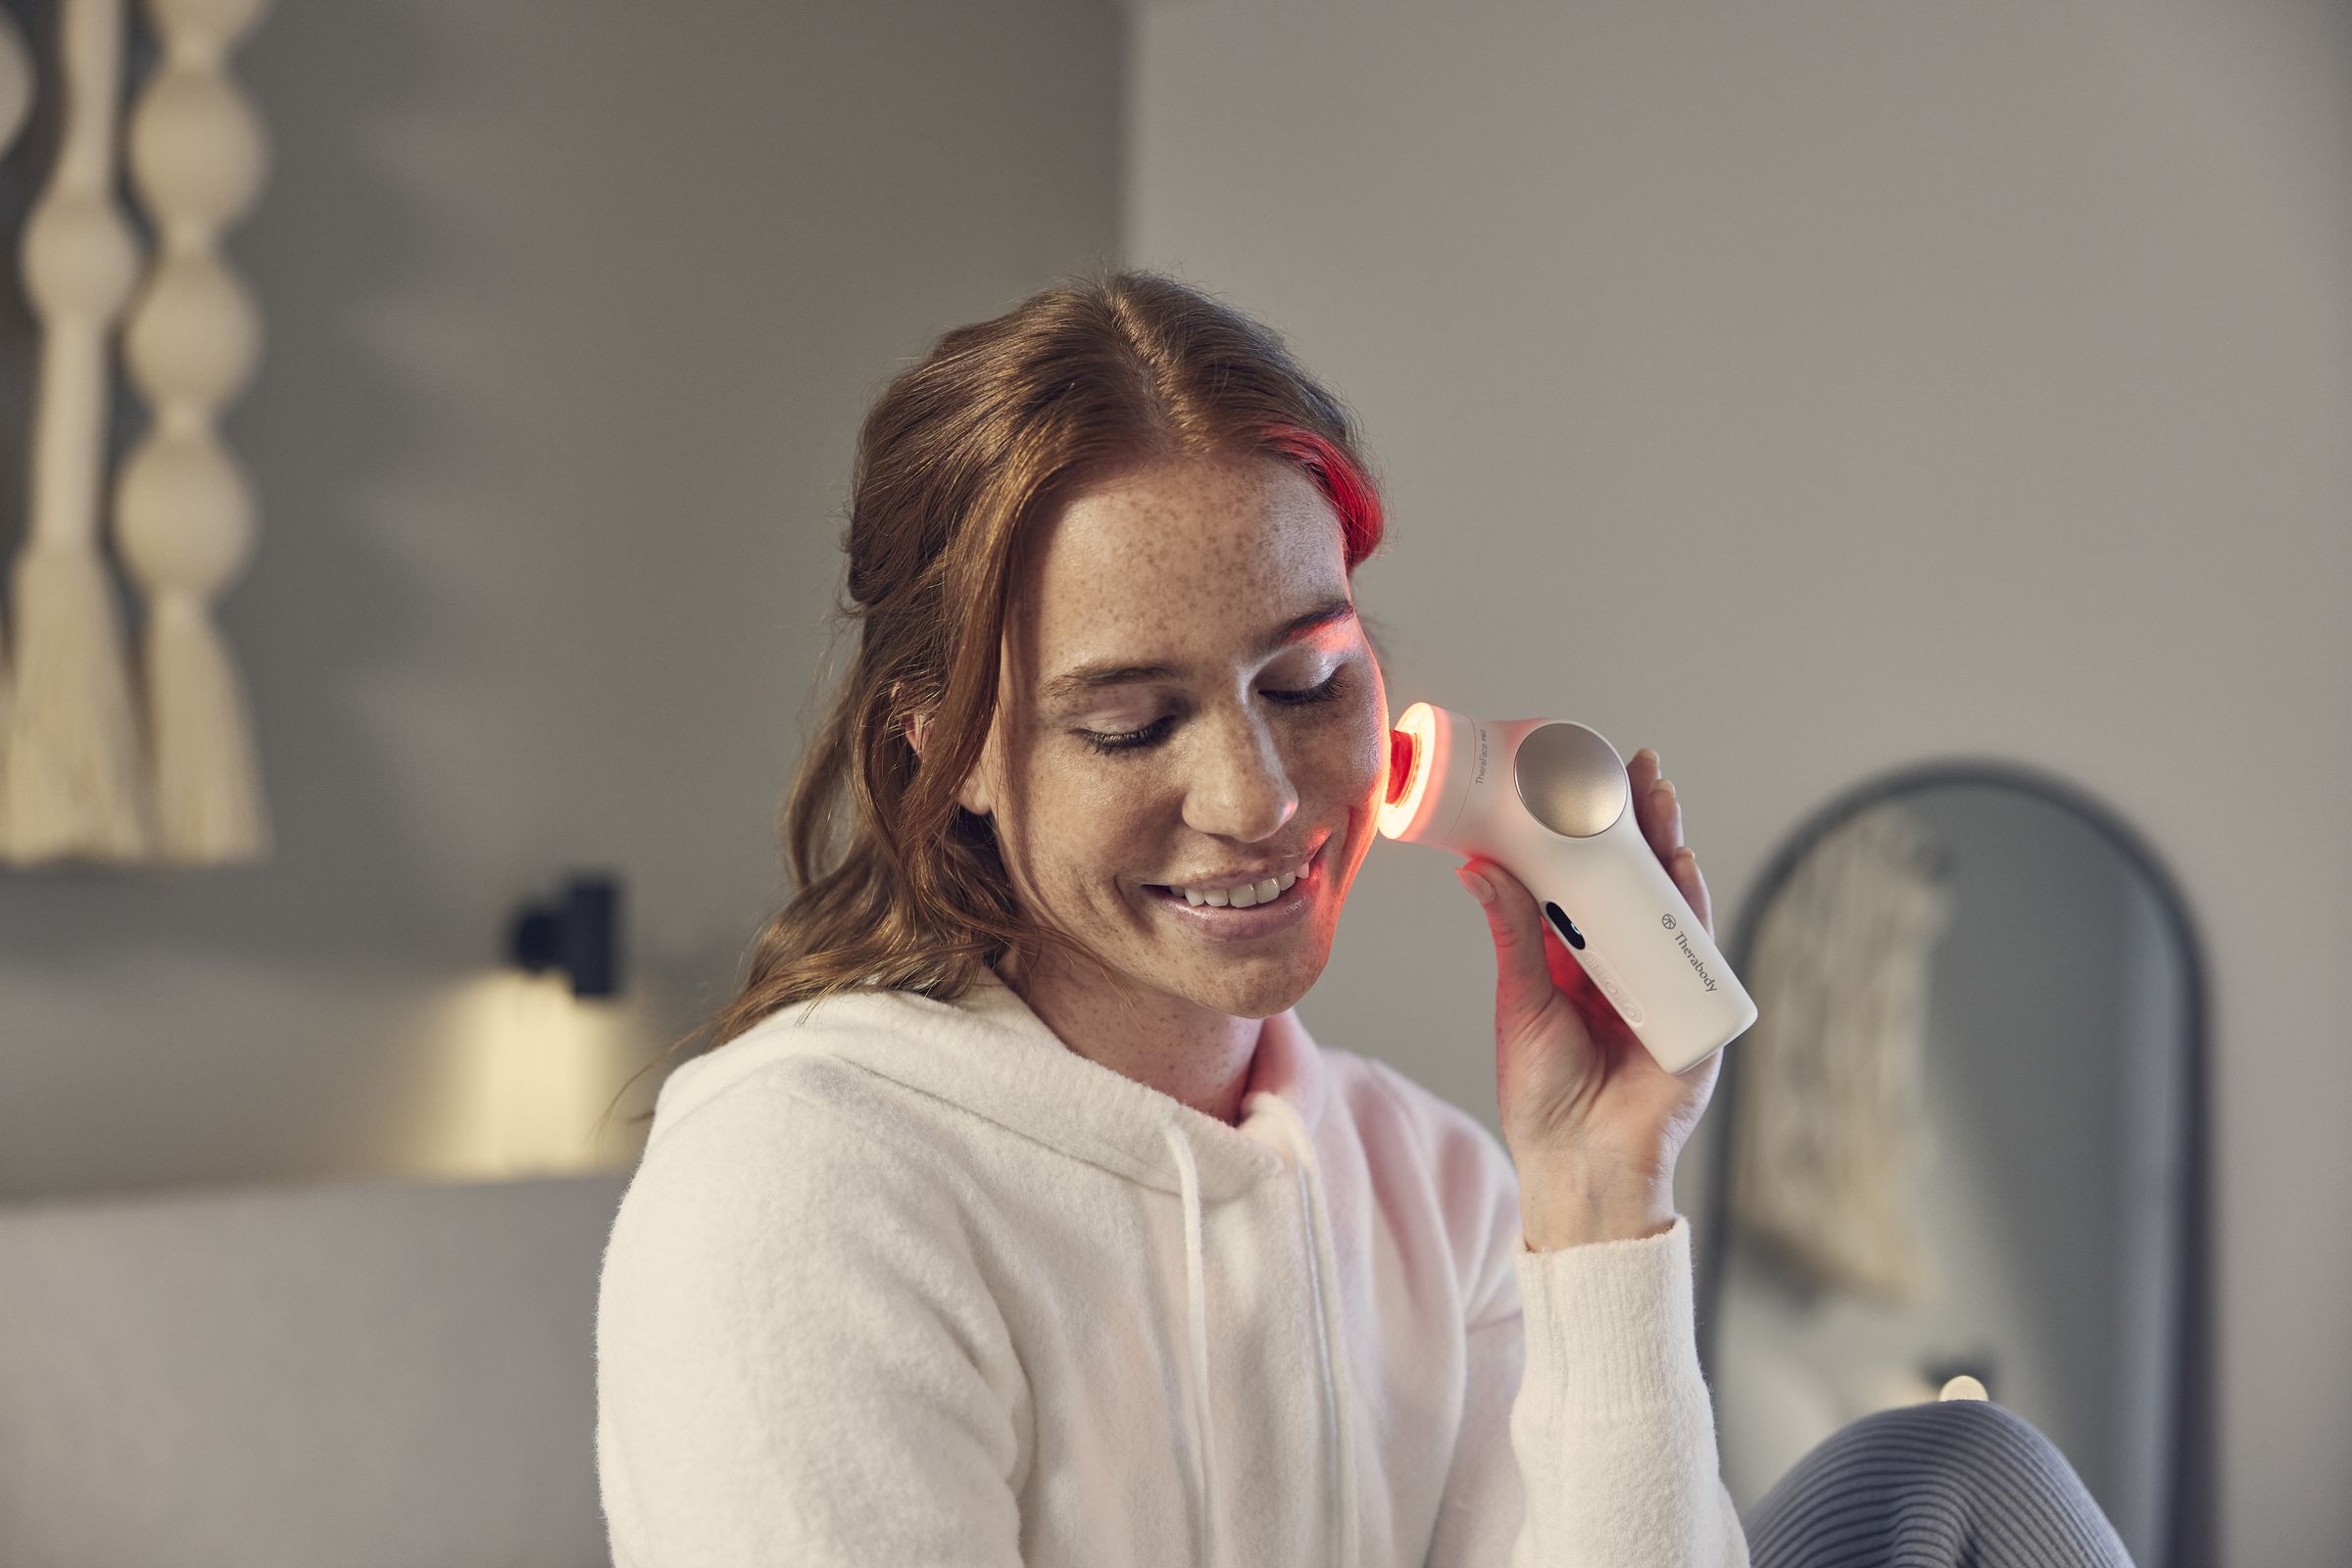 Therabody has a new massage gun for your face. It also does LED light therapy.